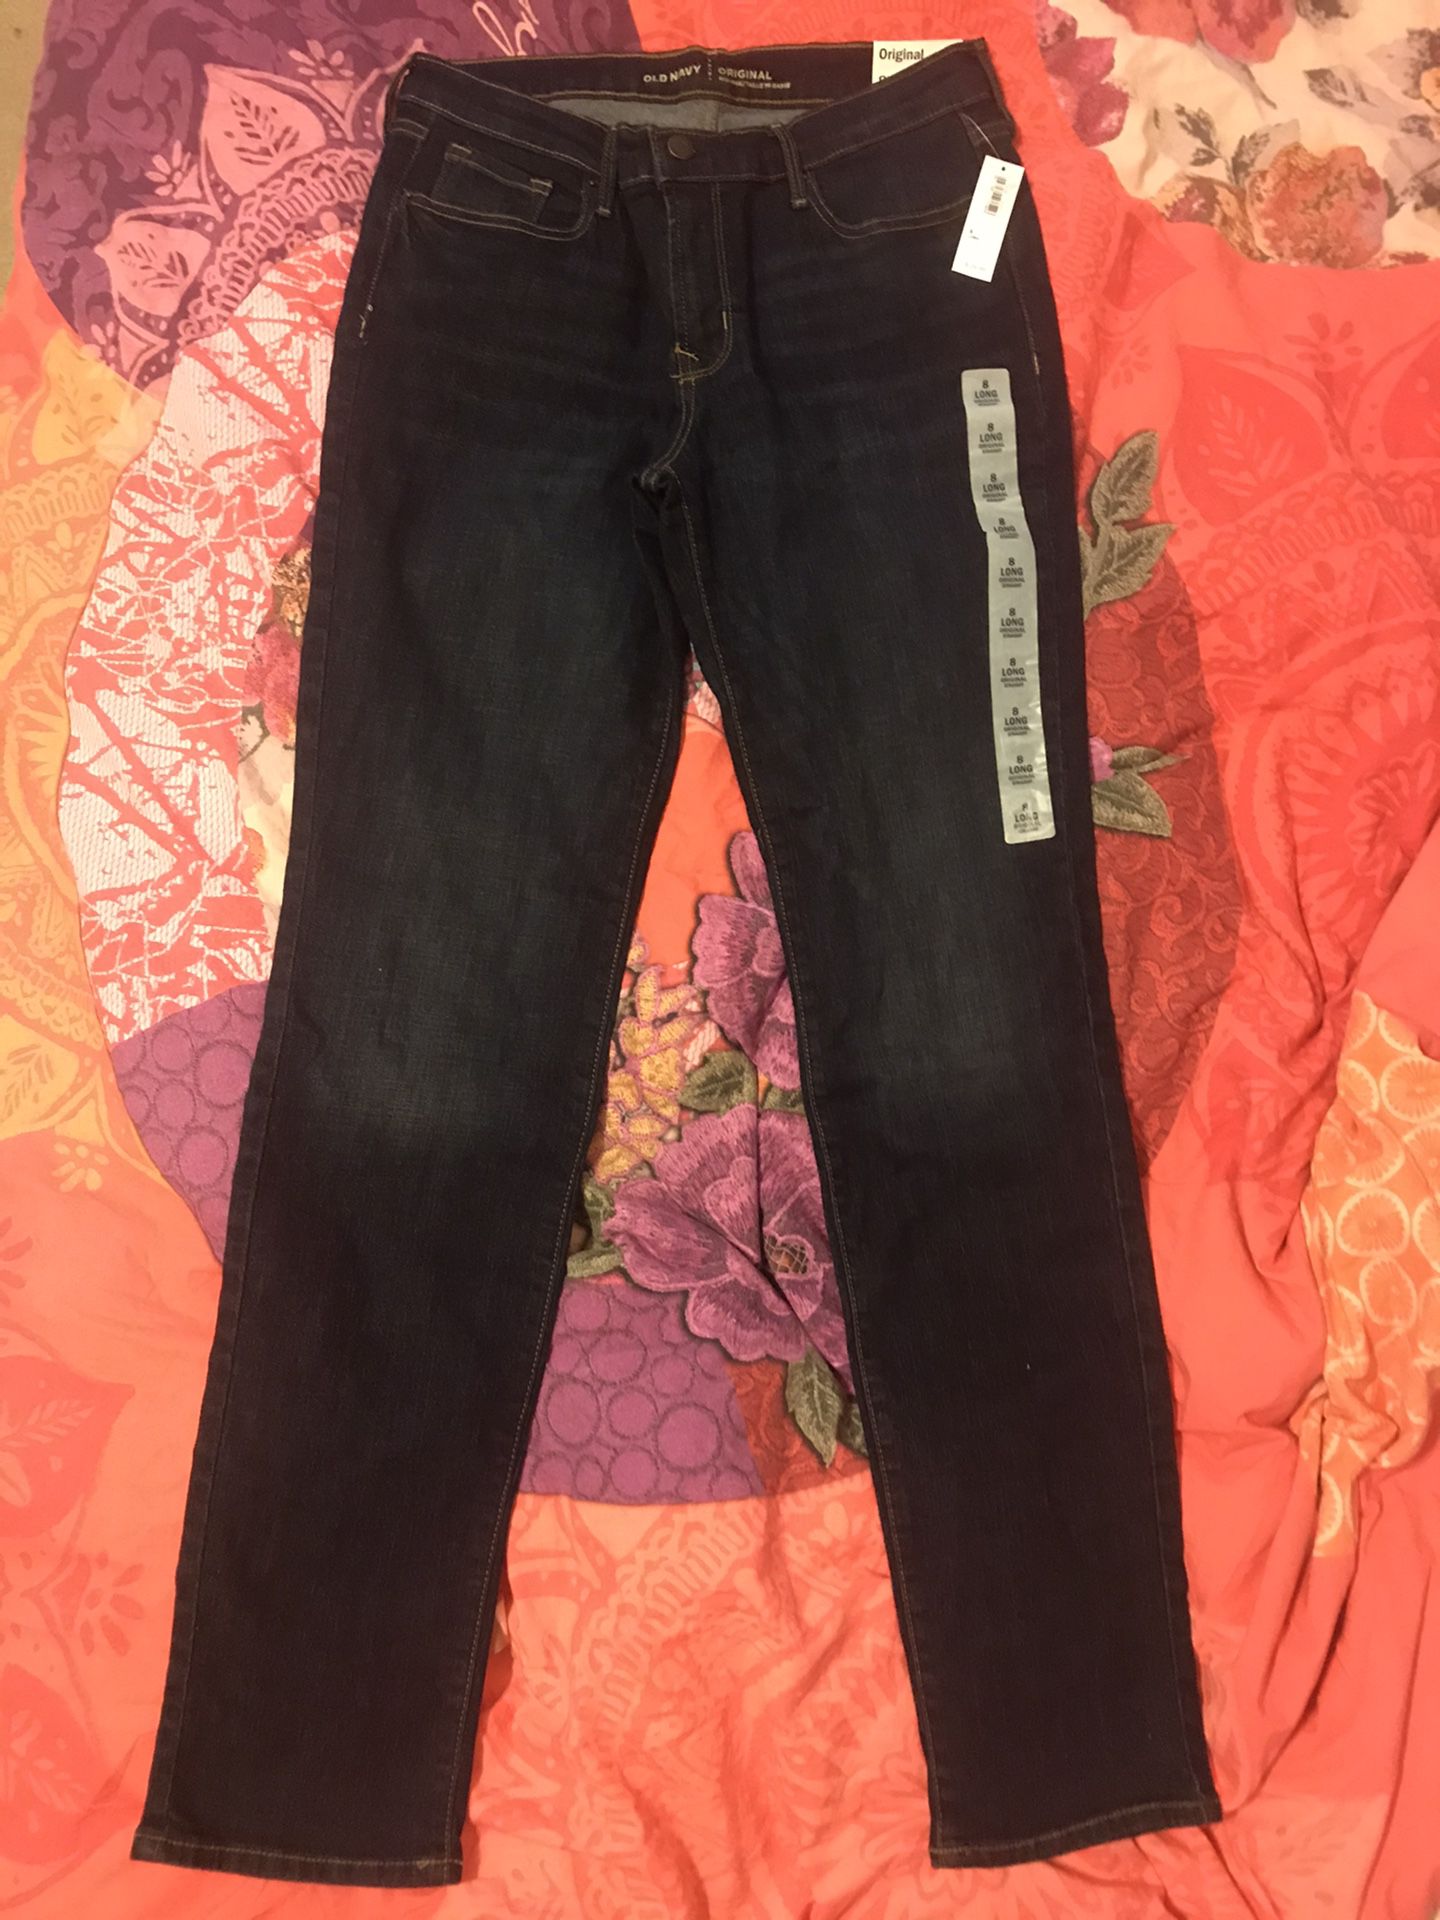 NWT Old Navy Original Straight Jeans - Size 8 Long